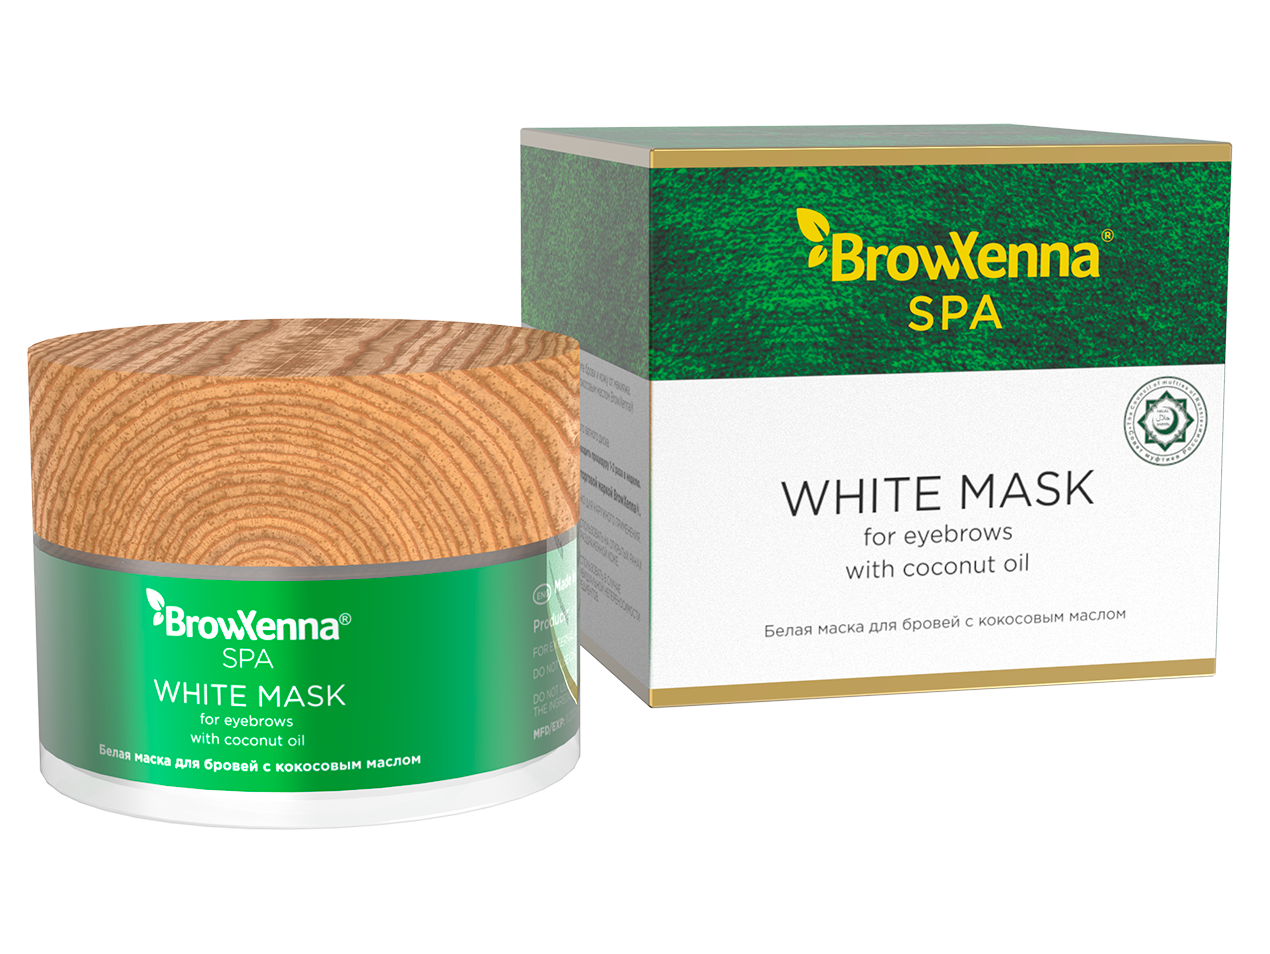 White mask with coconut oil for eyebrows, BrowXenna® SPA